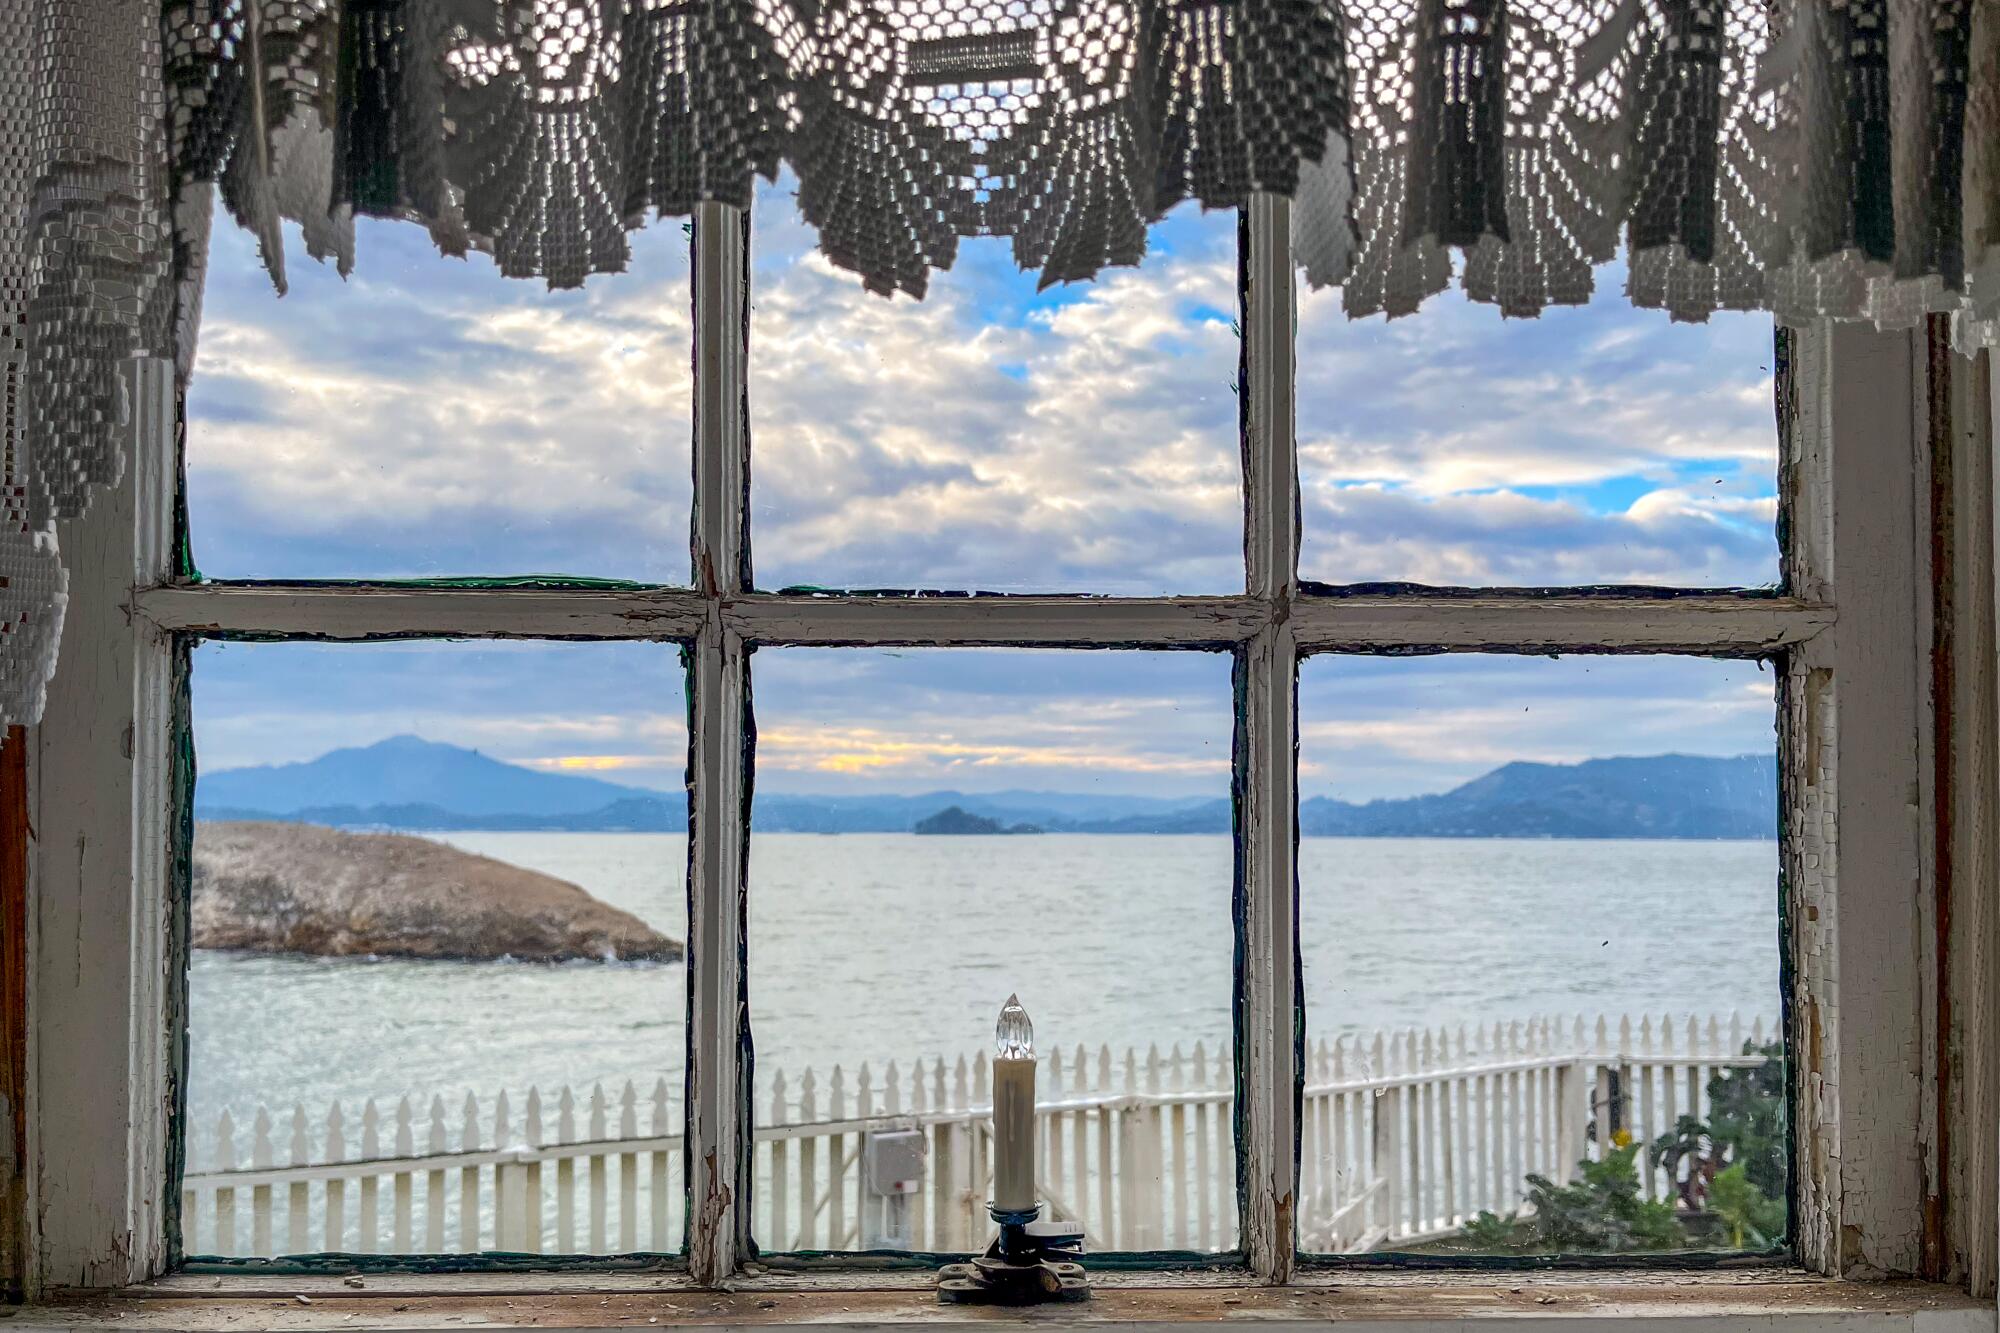 A view through a lace-curtained window of a white picket fence, greenery and the bay.